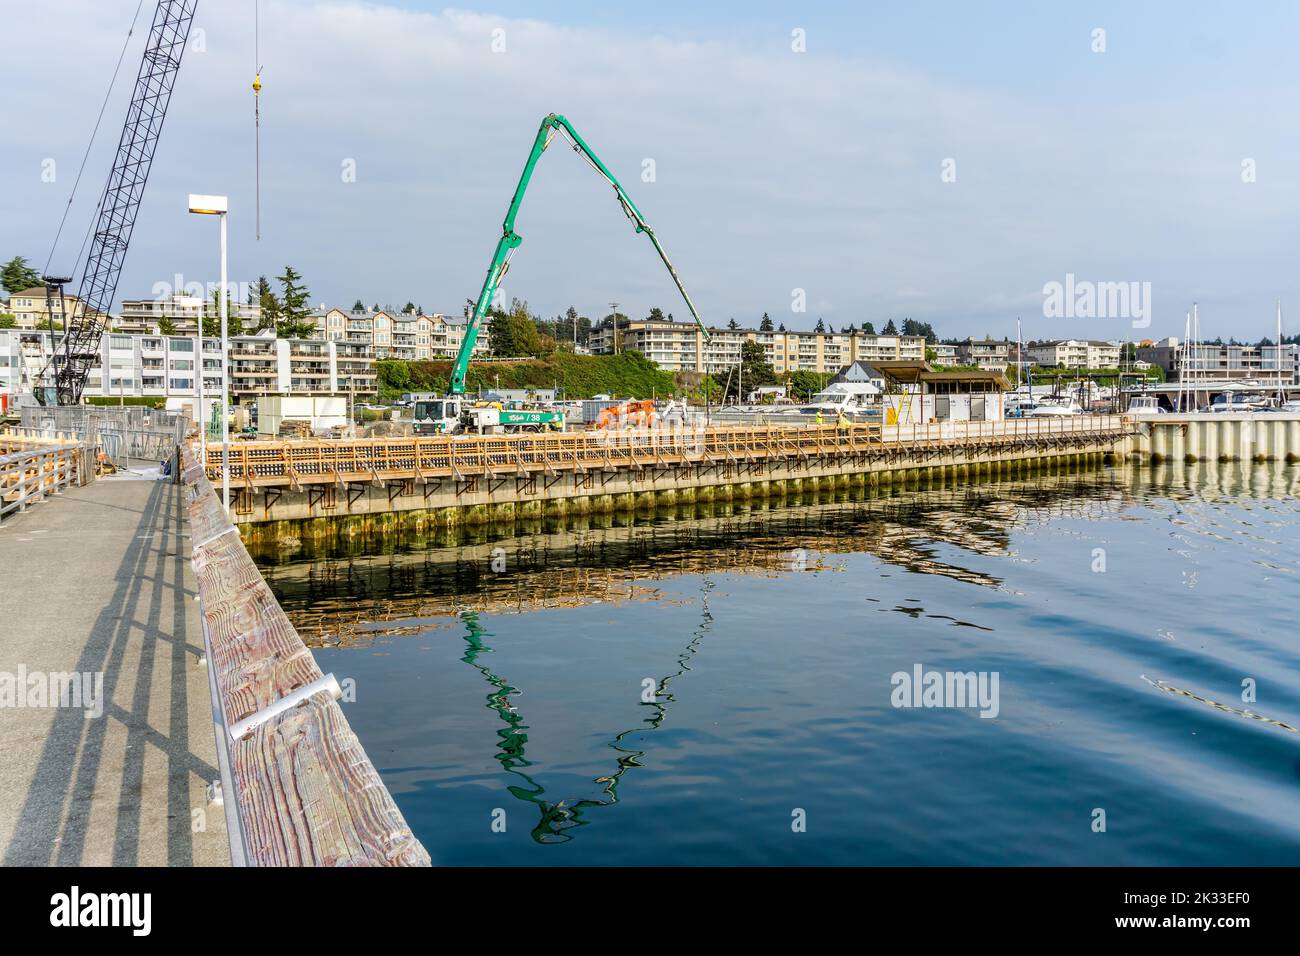 A crane at the Des Moines marina in Washington State shows that construction is happening. Stock Photo